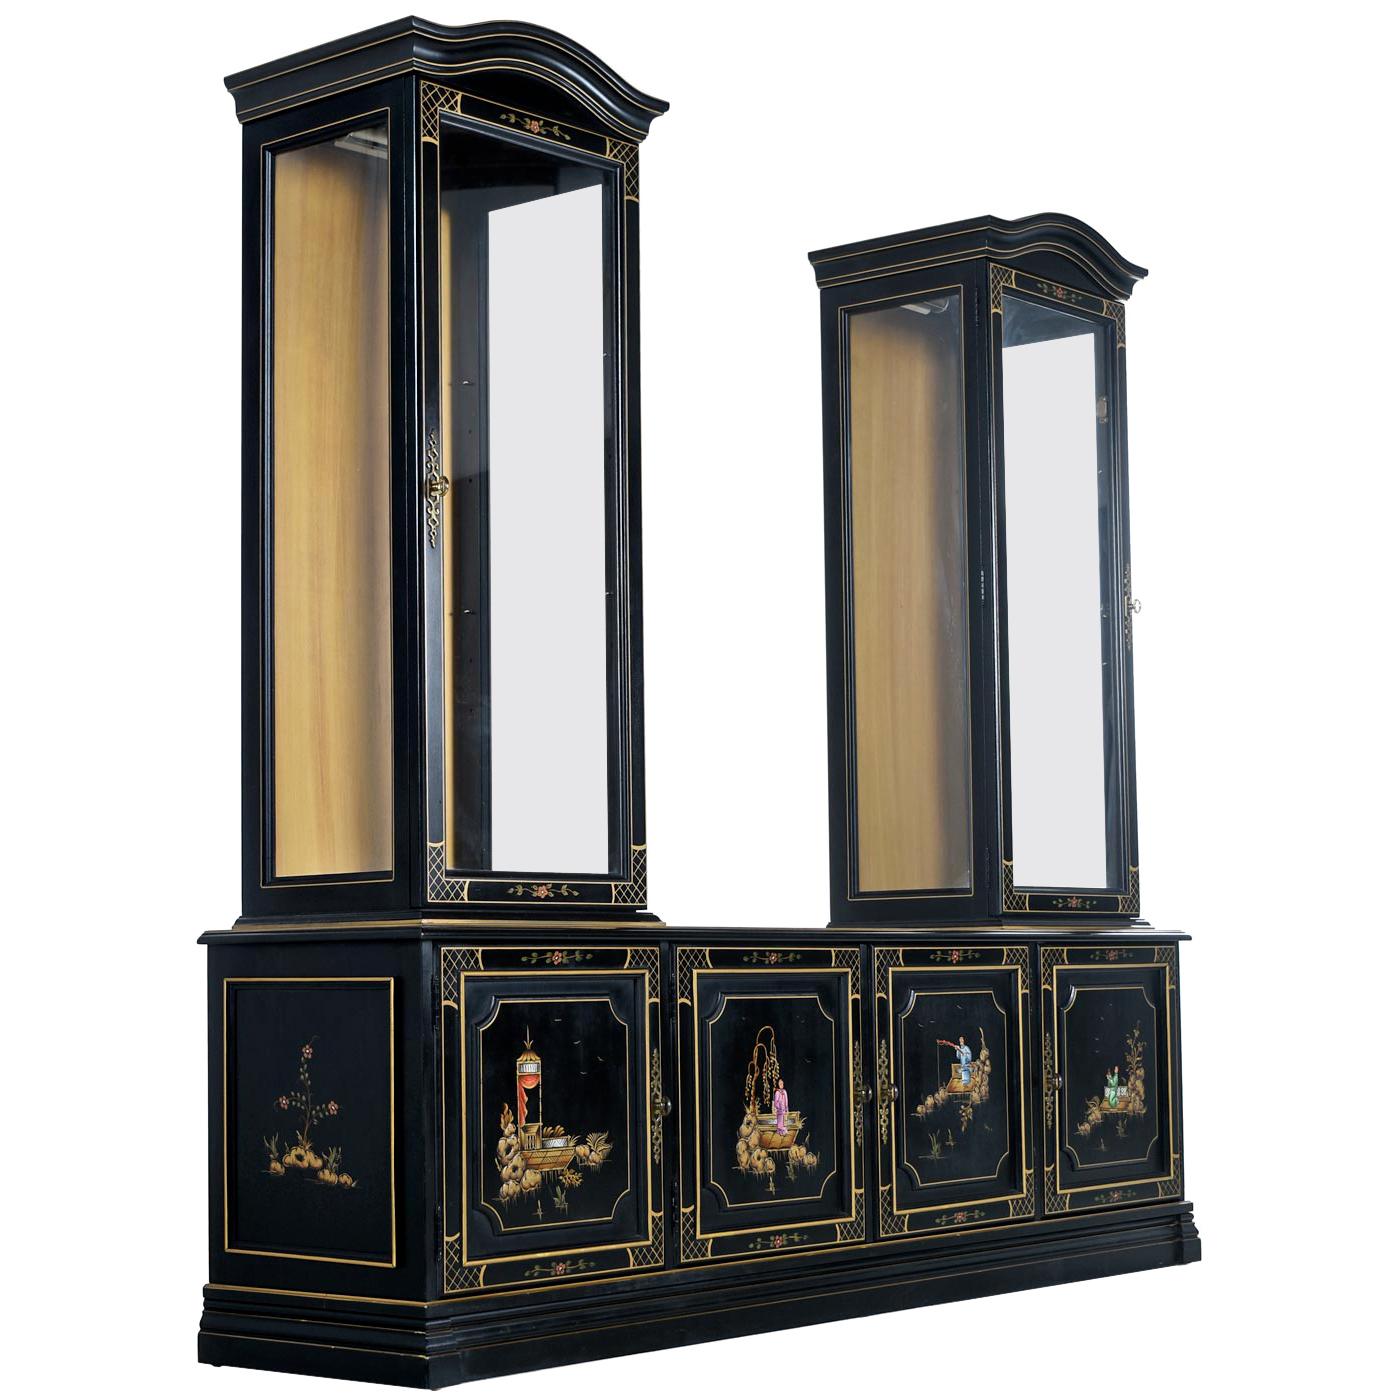 Expertly crafted with solid wood construction, this 1950s Jasper cabinet looks outstanding with it's gold gilt trim and hand painted Asian motif panels. Both glass display cabinet are lighted and individually wired. Arrange the modular / removable